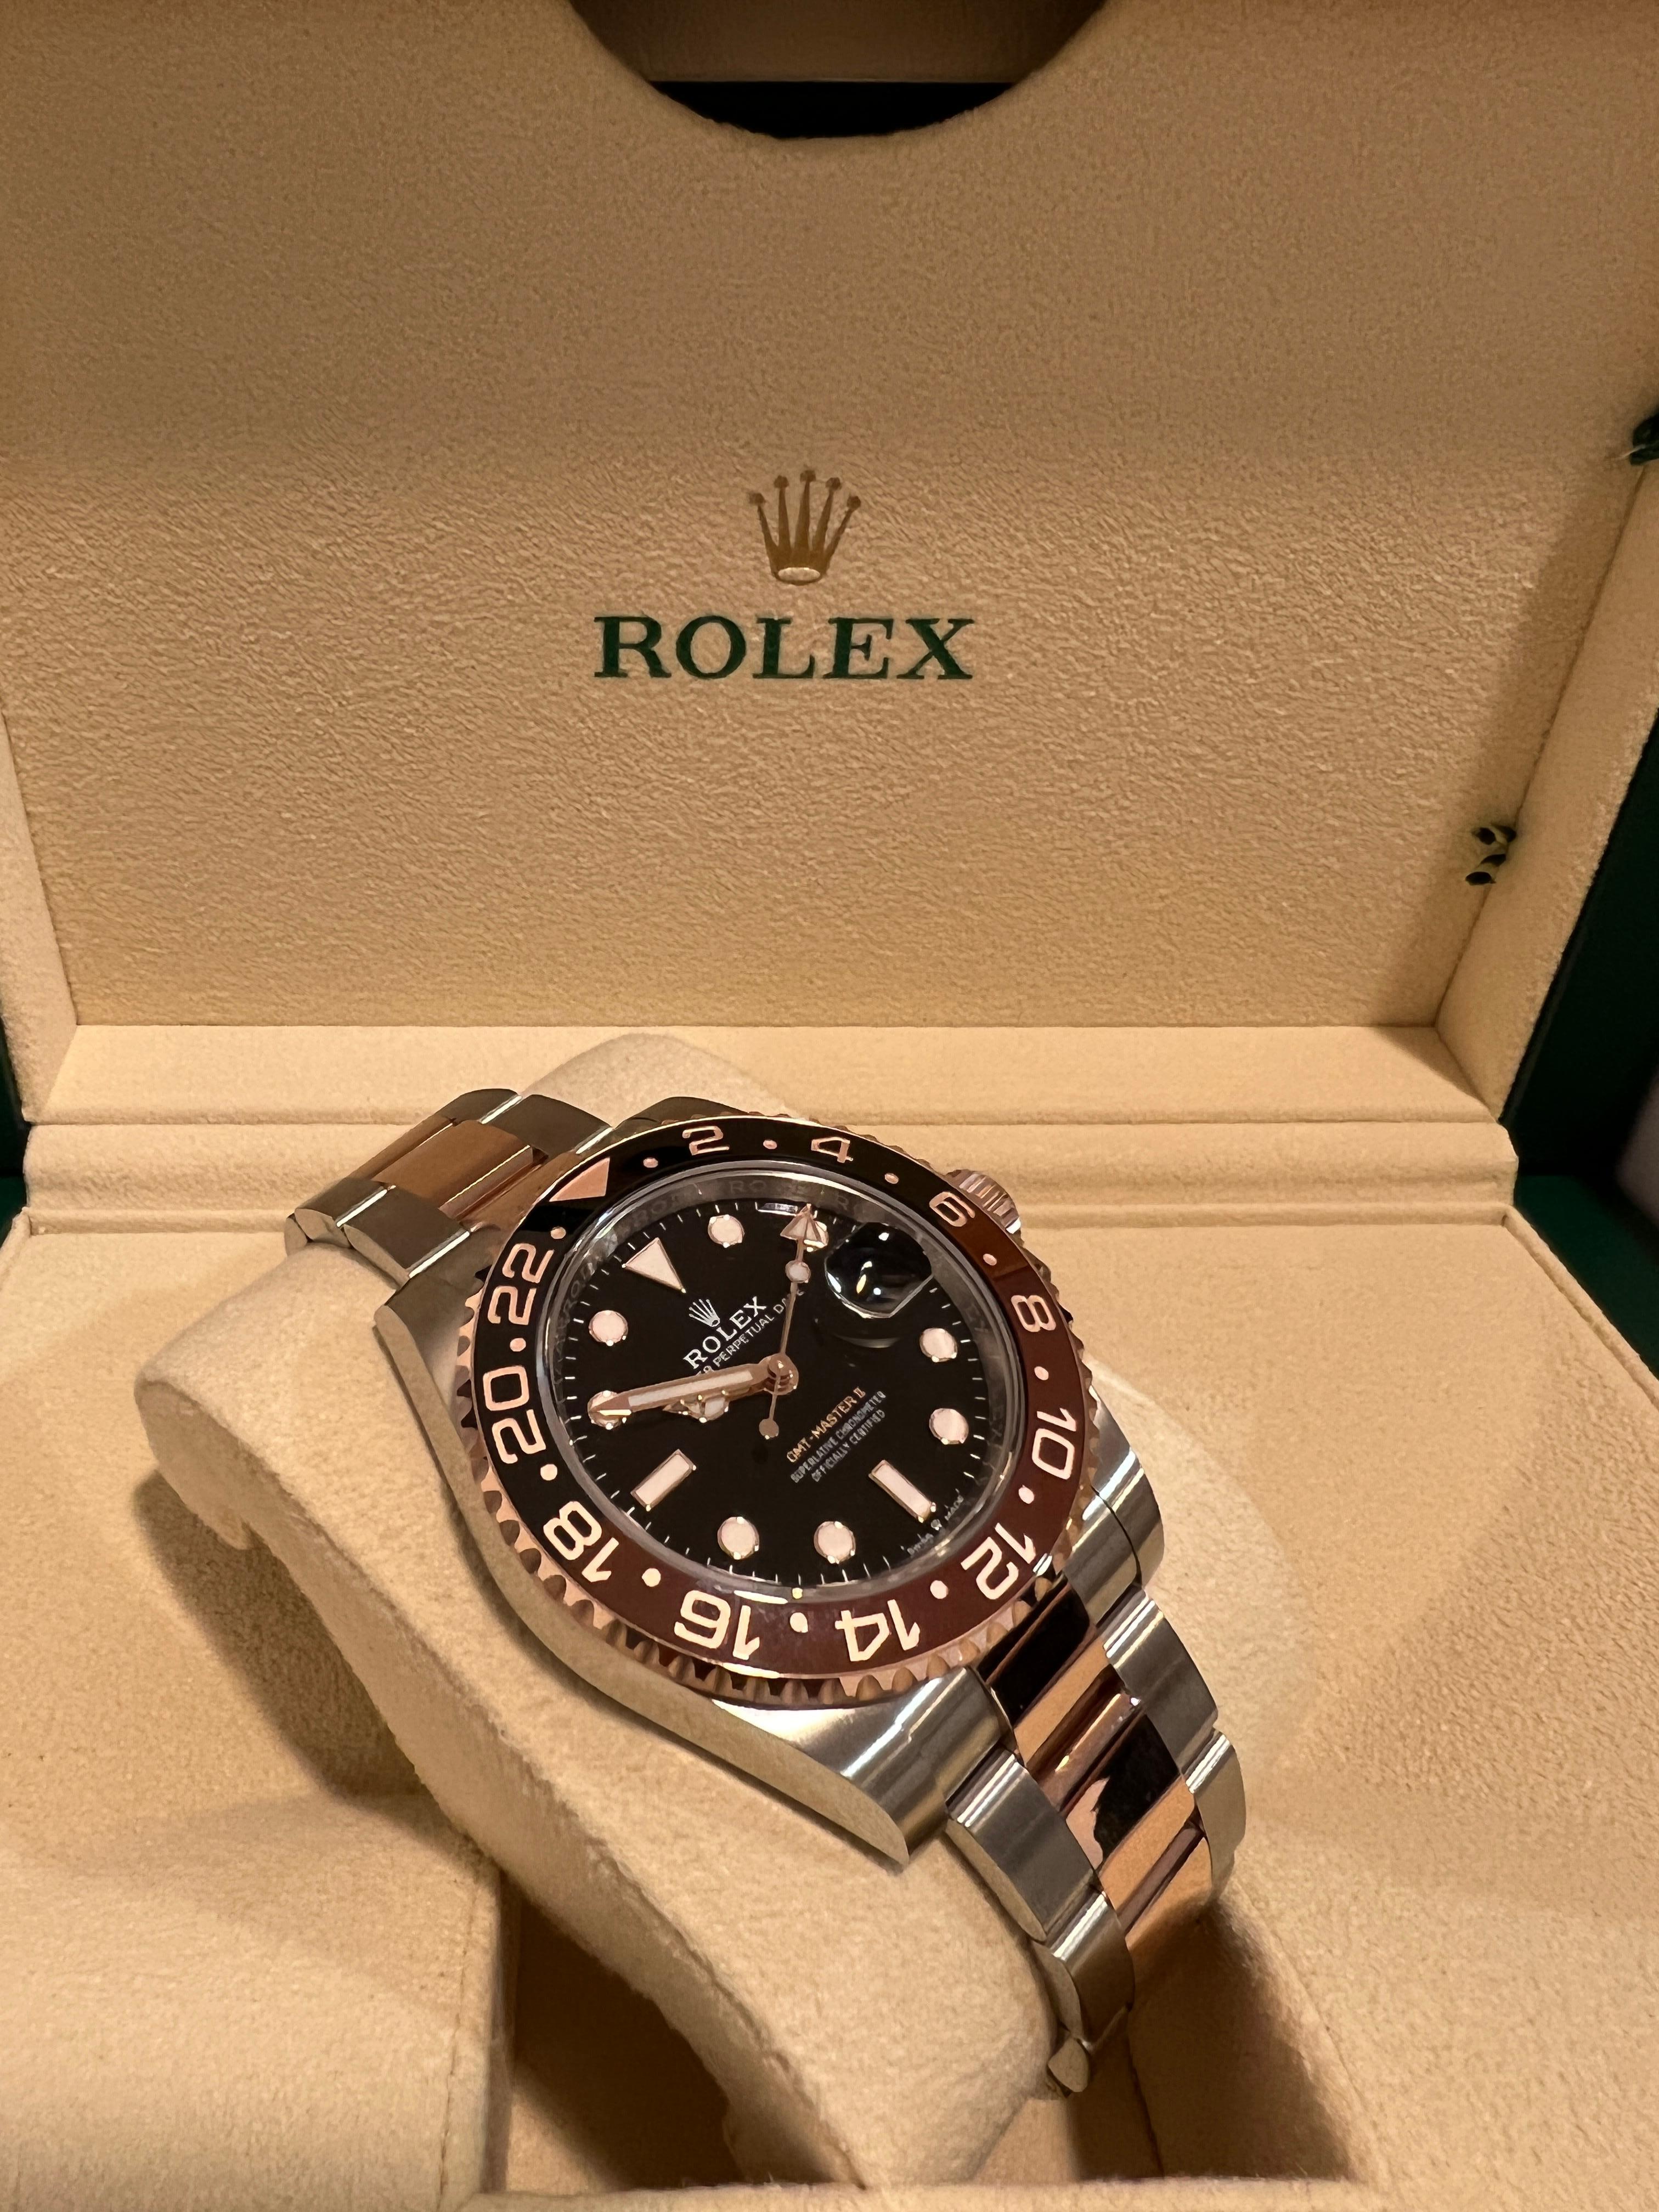 Rolex GMT-Master II 126711CHNR

GMT-MASTER II OYSTER, 40 MM, OYSTERSTEEL AND EVEROSE GOLD The Rolex GMT-Master was originally designed for professional use to aid airline pilots. However, its combination of peerless functionality and instantly